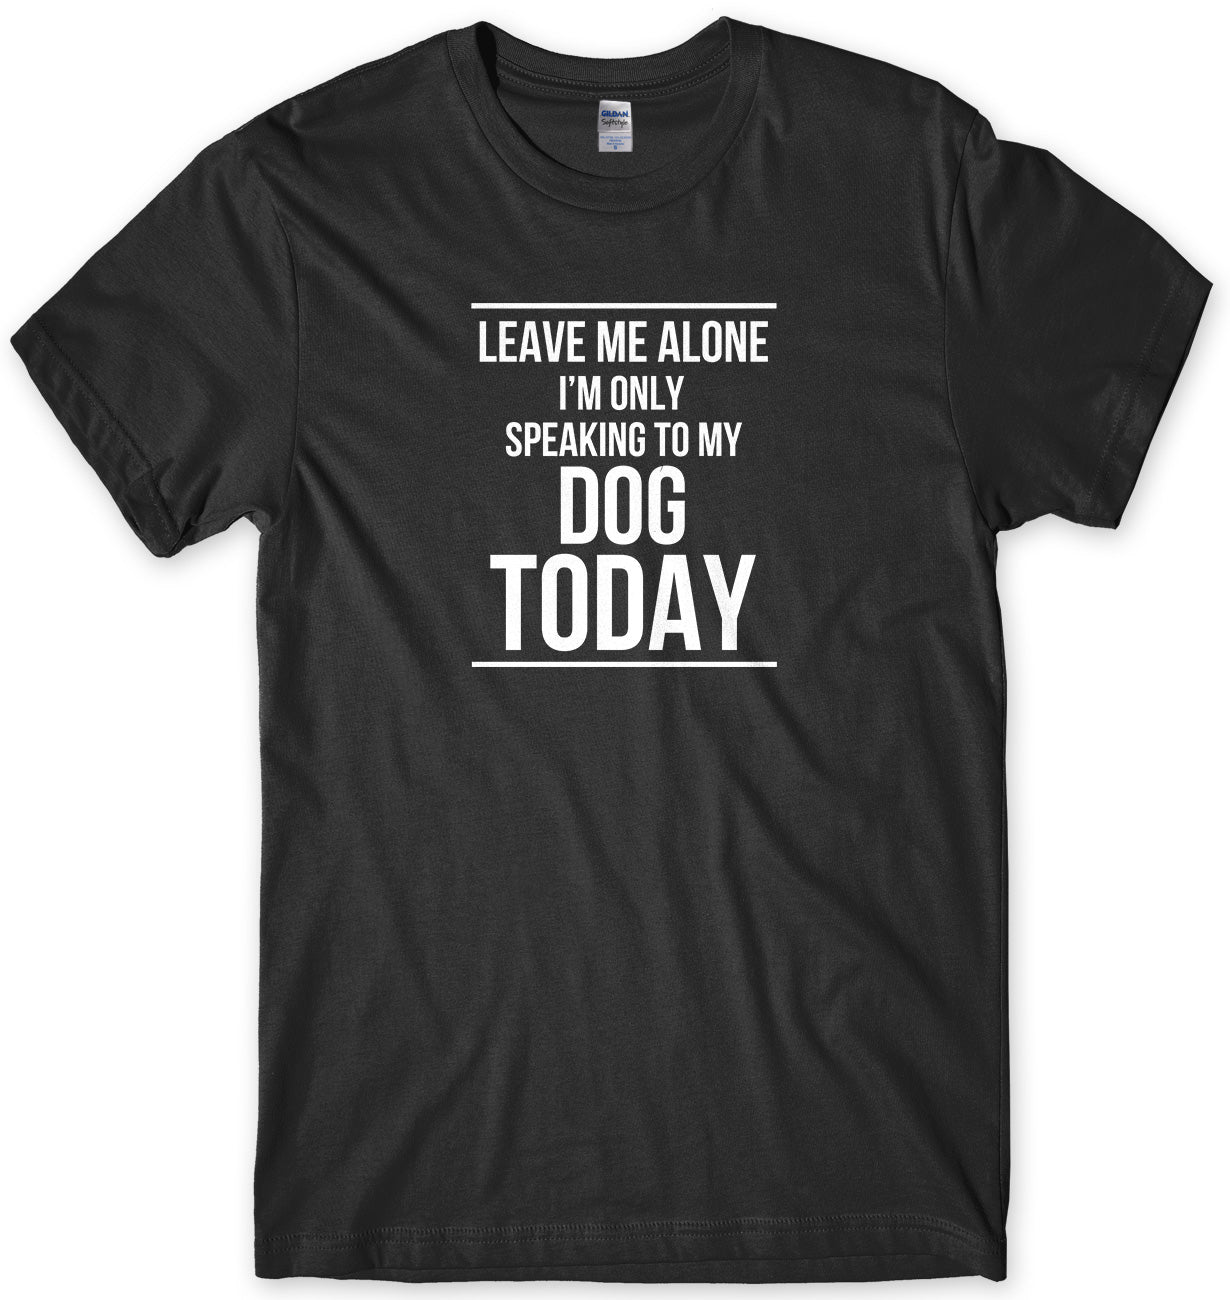 LEAVE ME ALONE I'M ONLY SPEAKING TO MY DOG TODAY MENS FUNNY SLOGAN UNISEX T-SHIRT